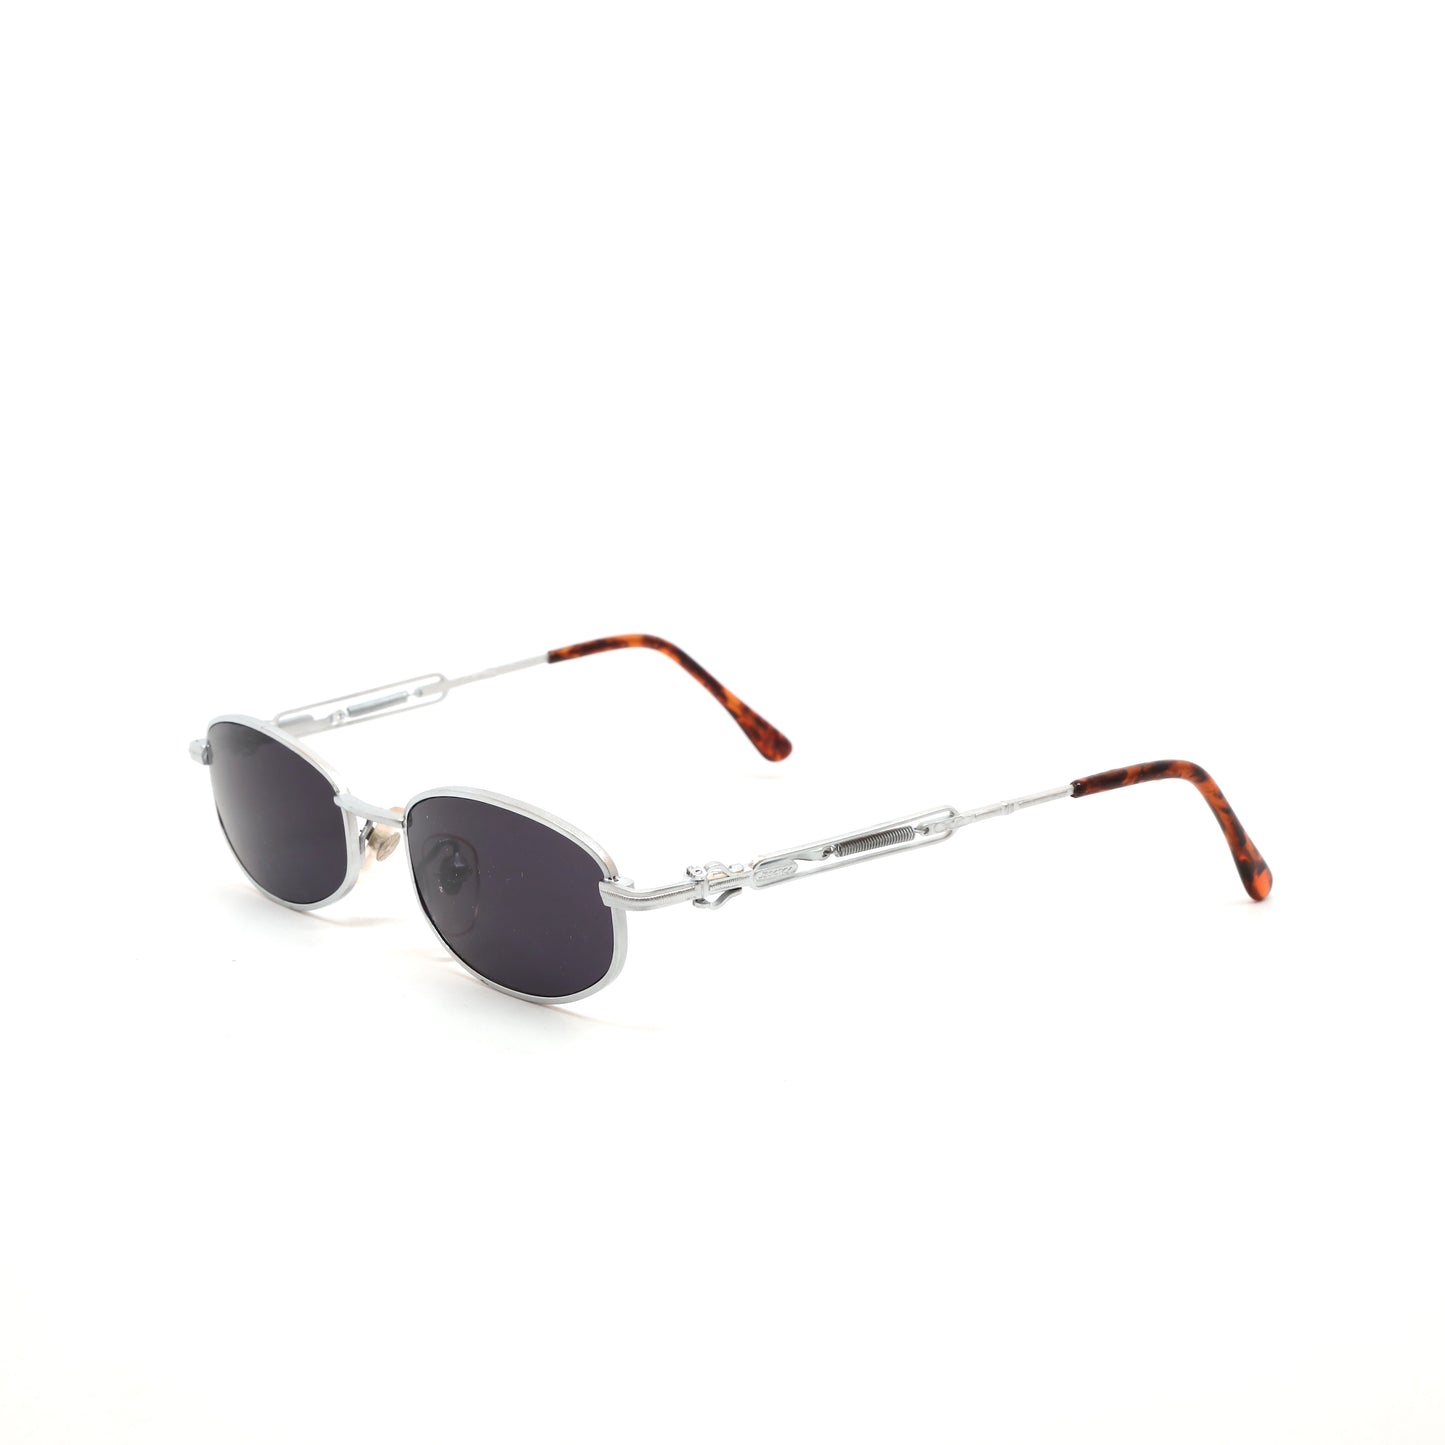 Vintage 90s New Old Stock Industrial Spring Hinge Sunglasses - Silver